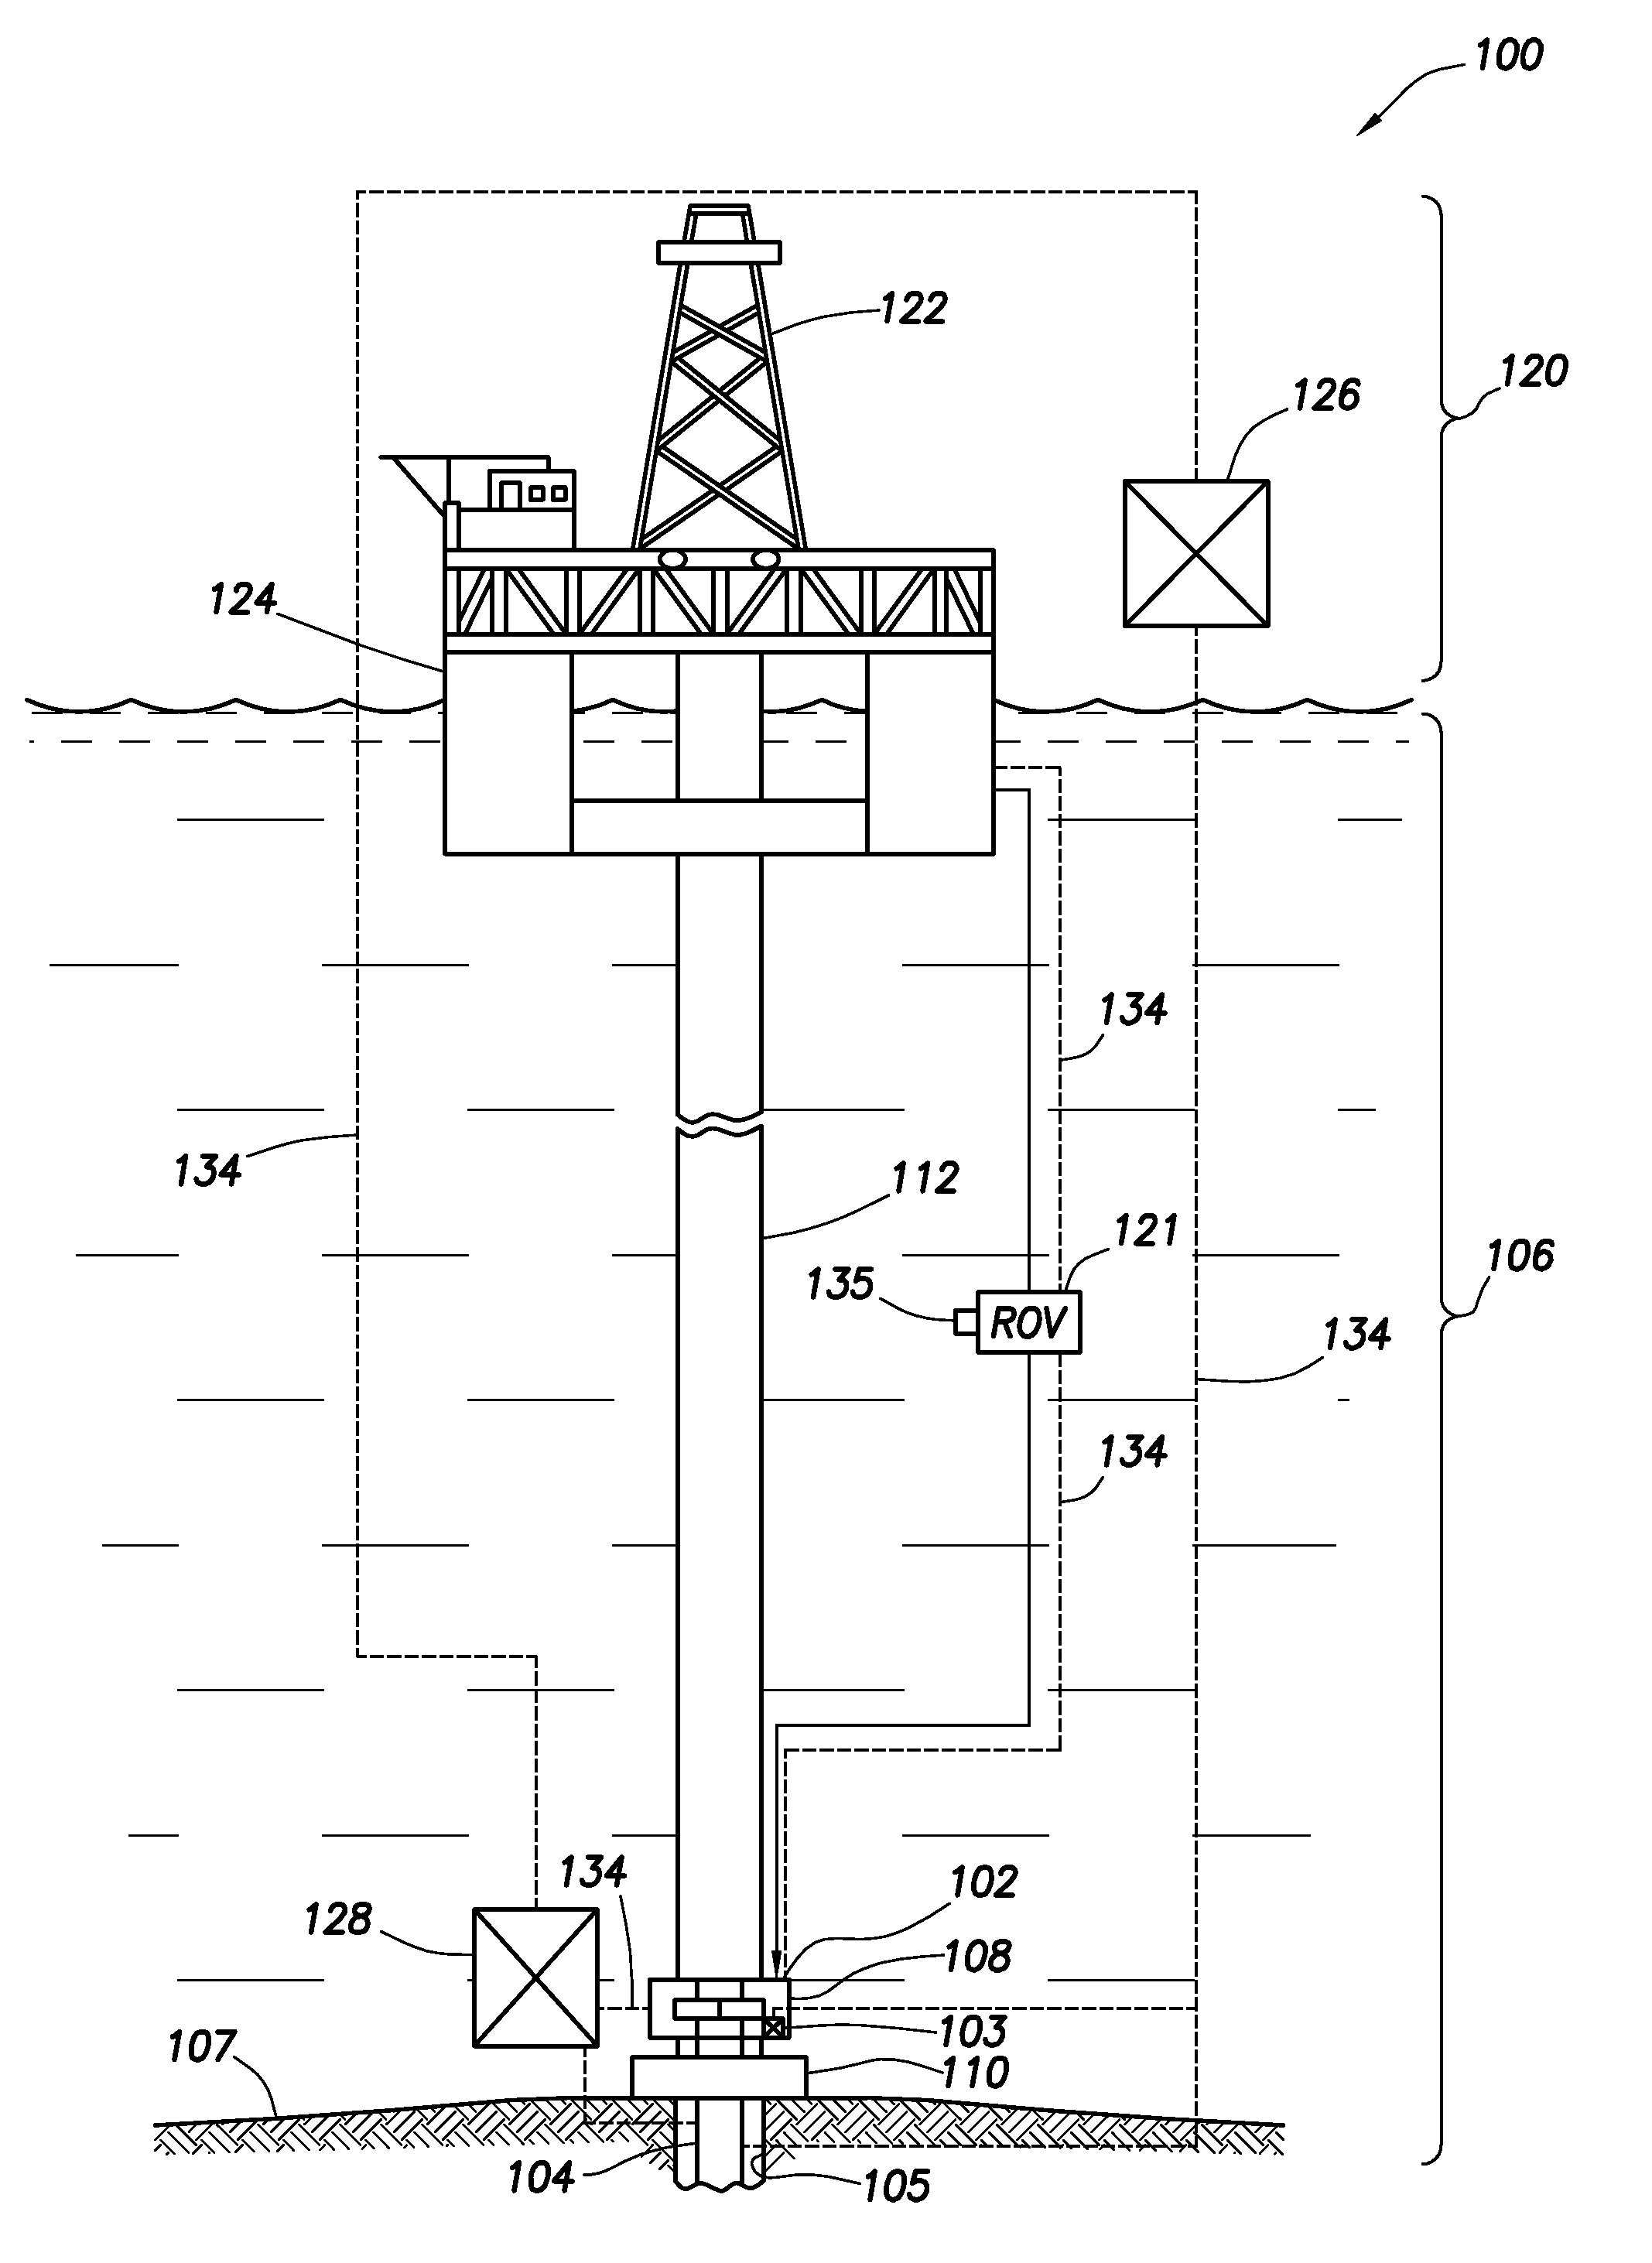 Blowout preventer monitoring system and method of using same